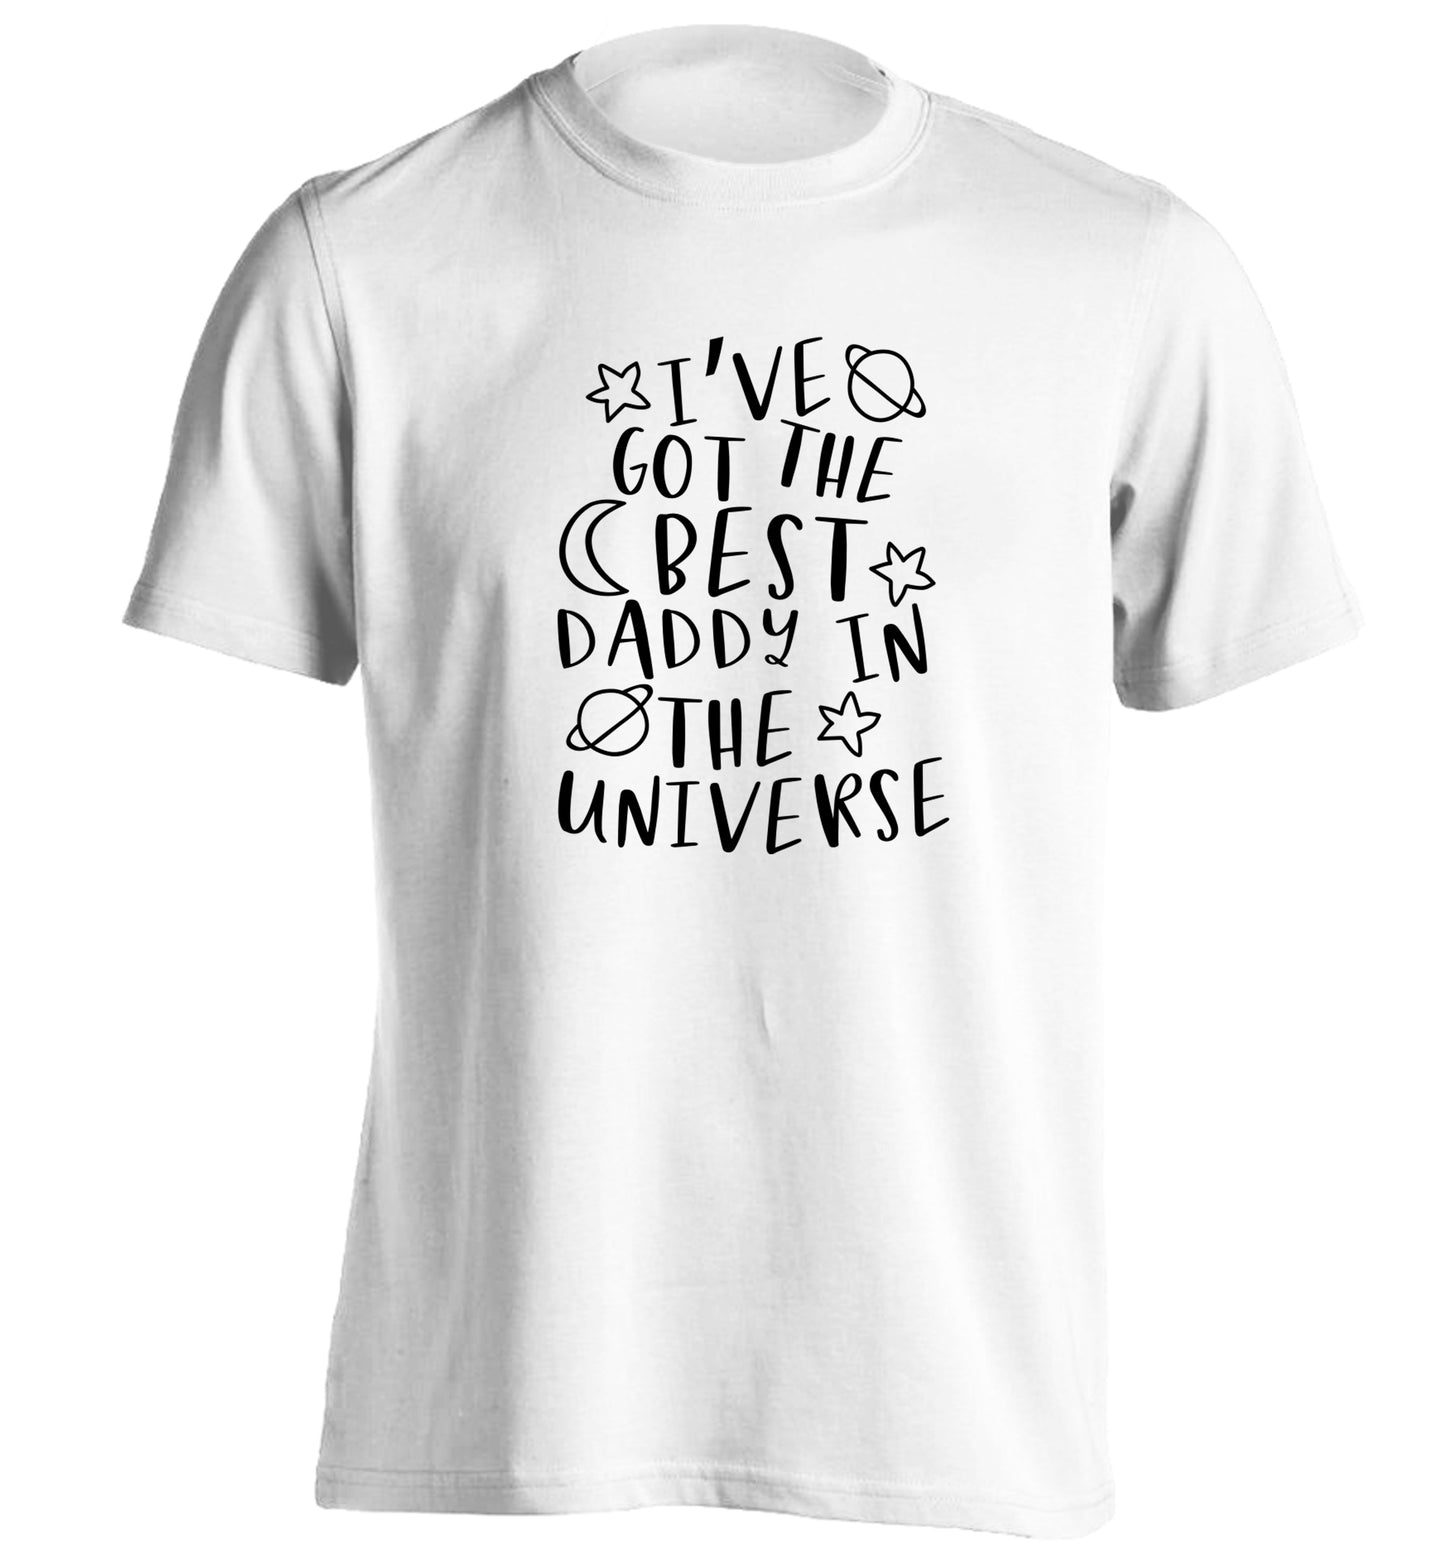 I've got the best daddy in the universe adults unisex white Tshirt 2XL